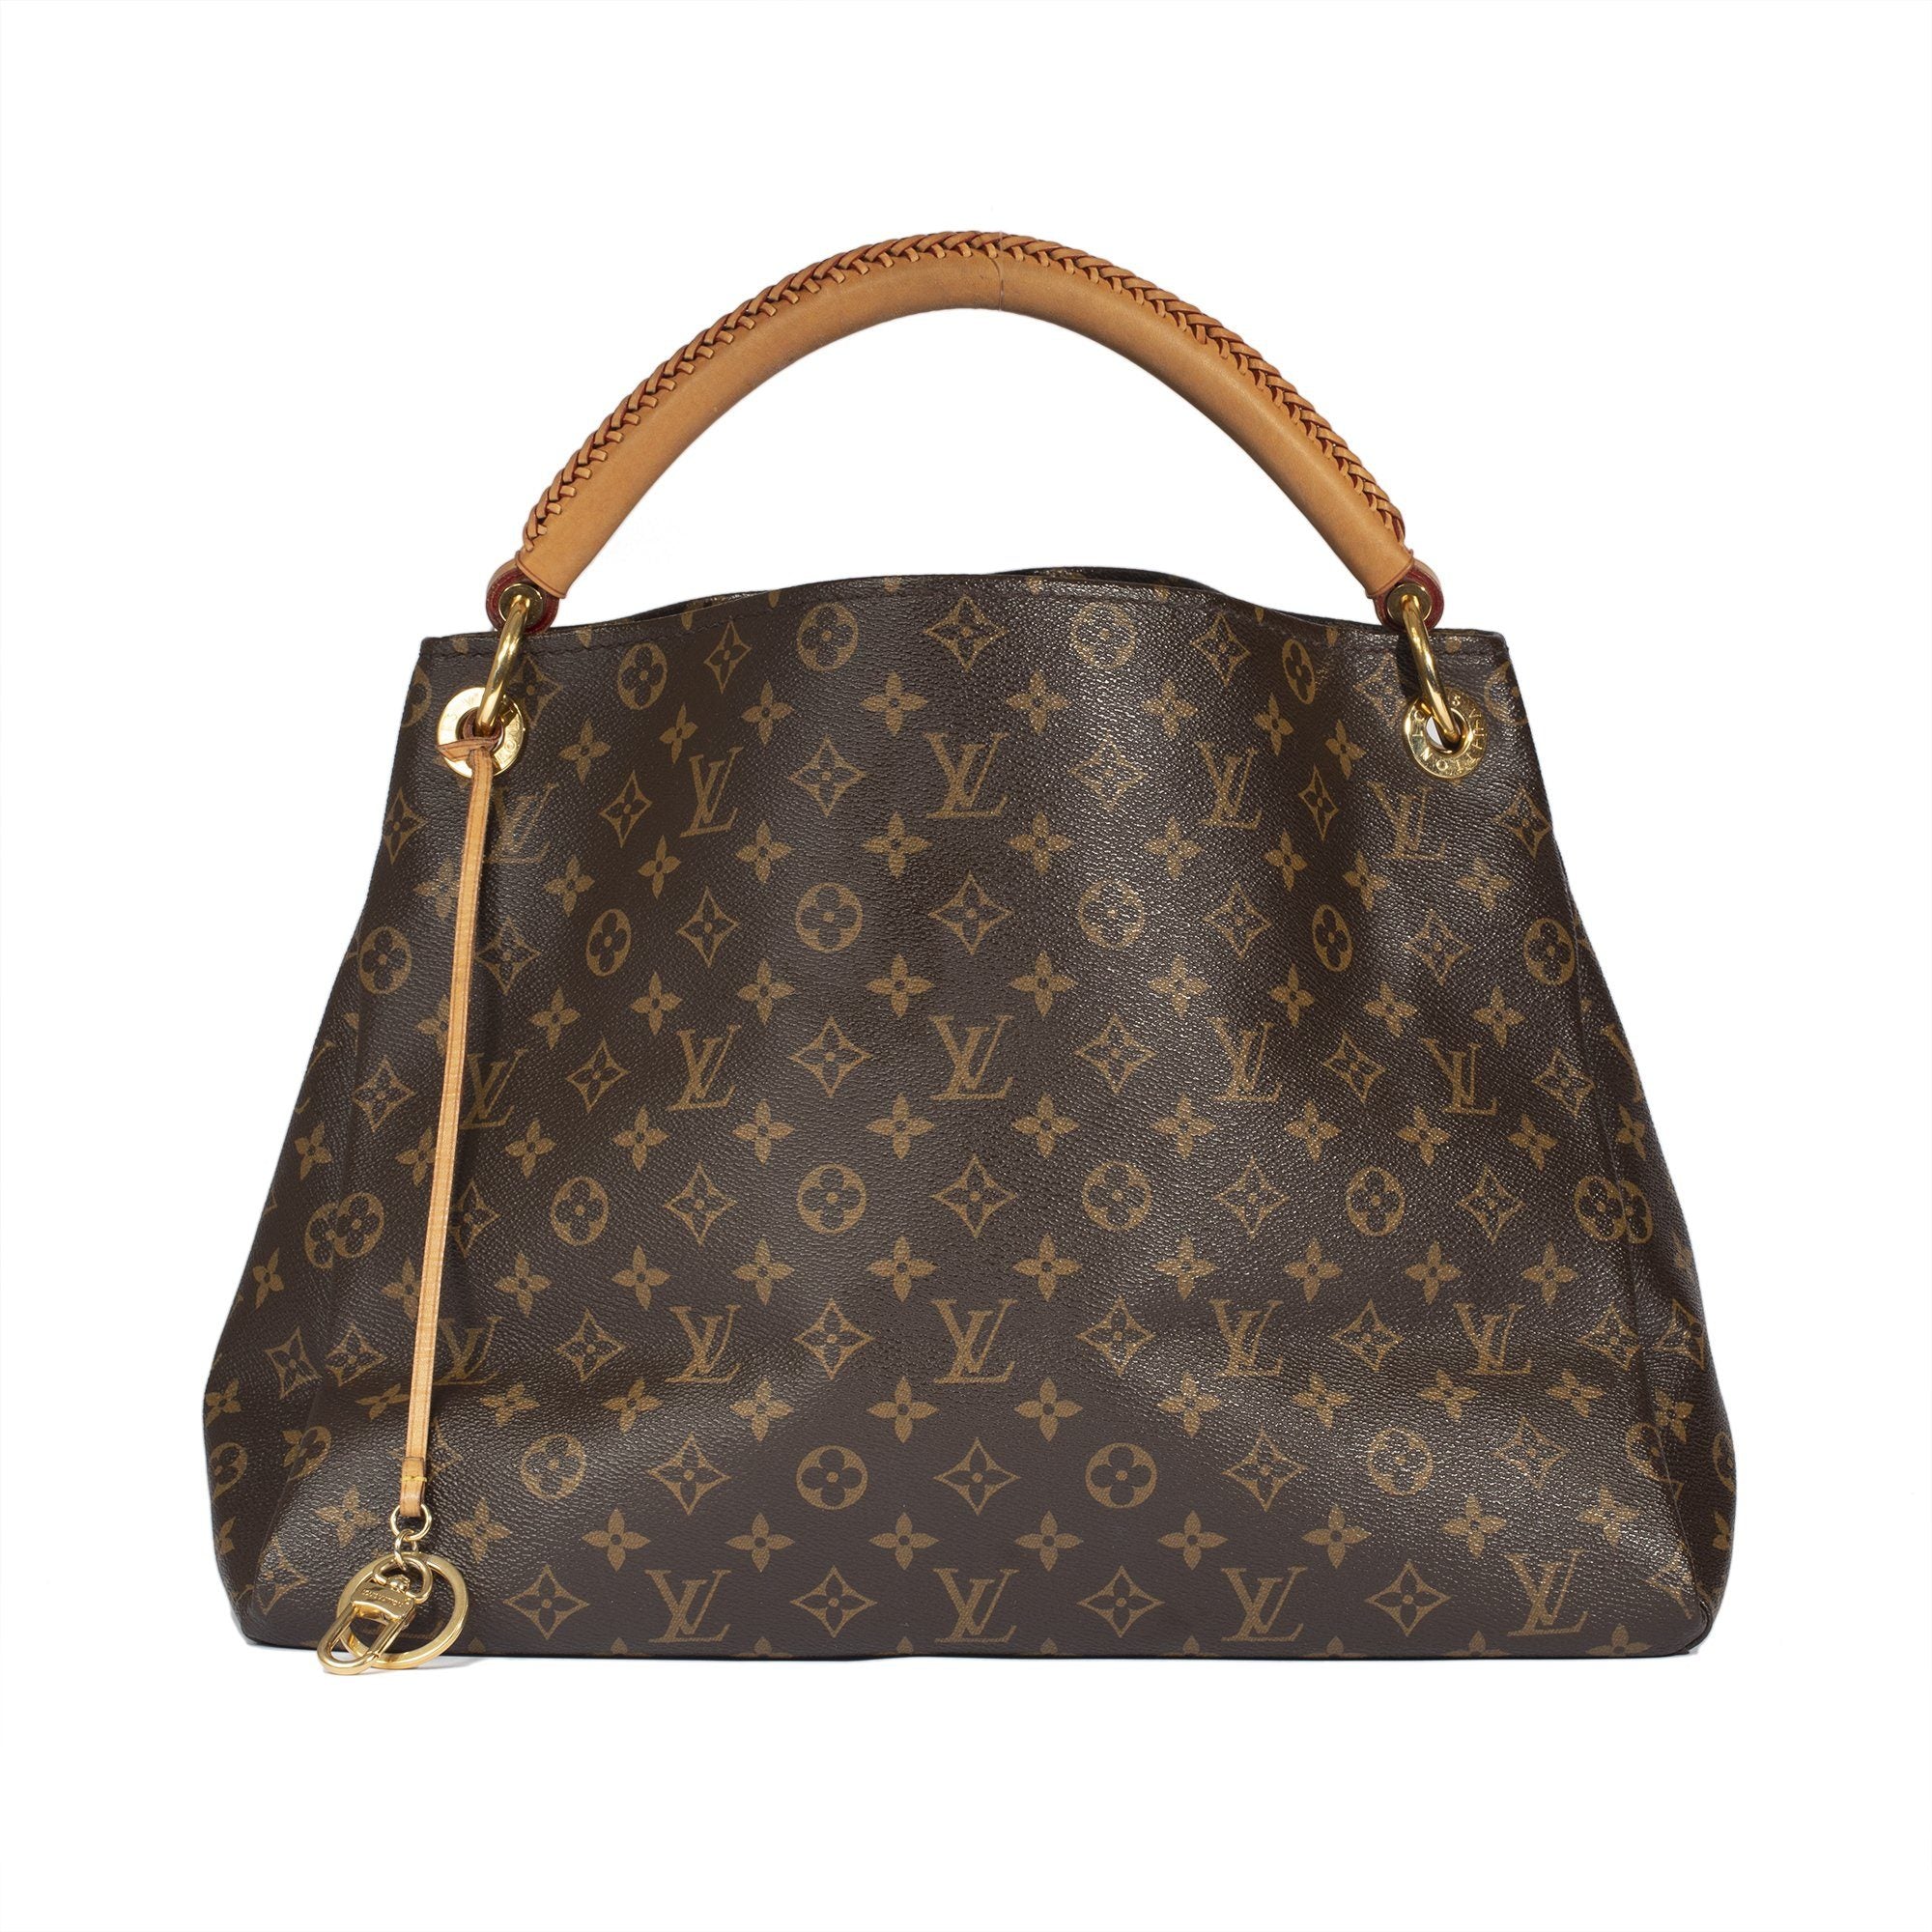 Speedy 40 - Louis Vuitton  Speedy 40 - Louis Vuitton by Lola Collective  Bags